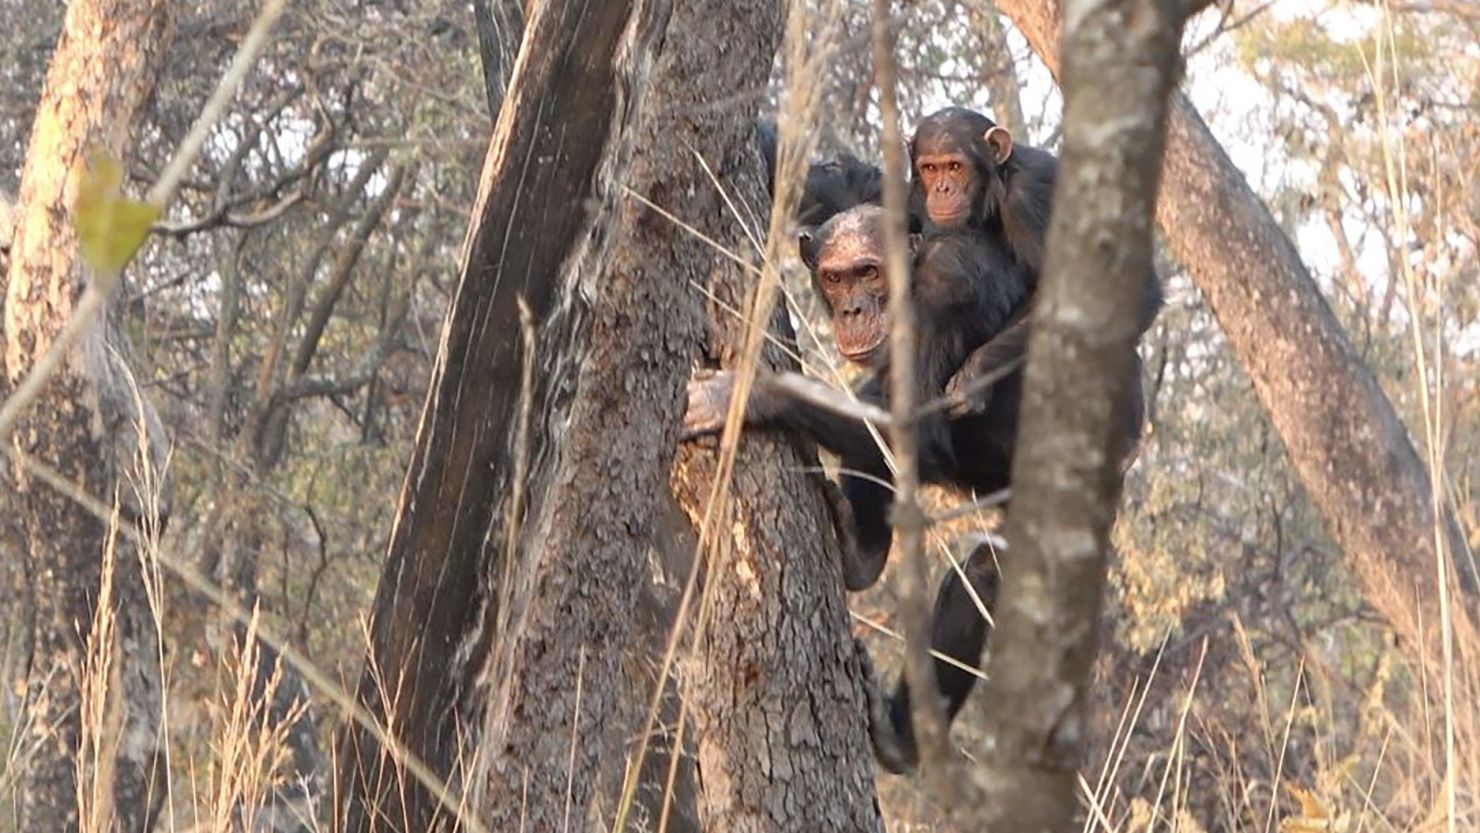 Scientists studied 13 adult chimpanzees living in Tanzania.